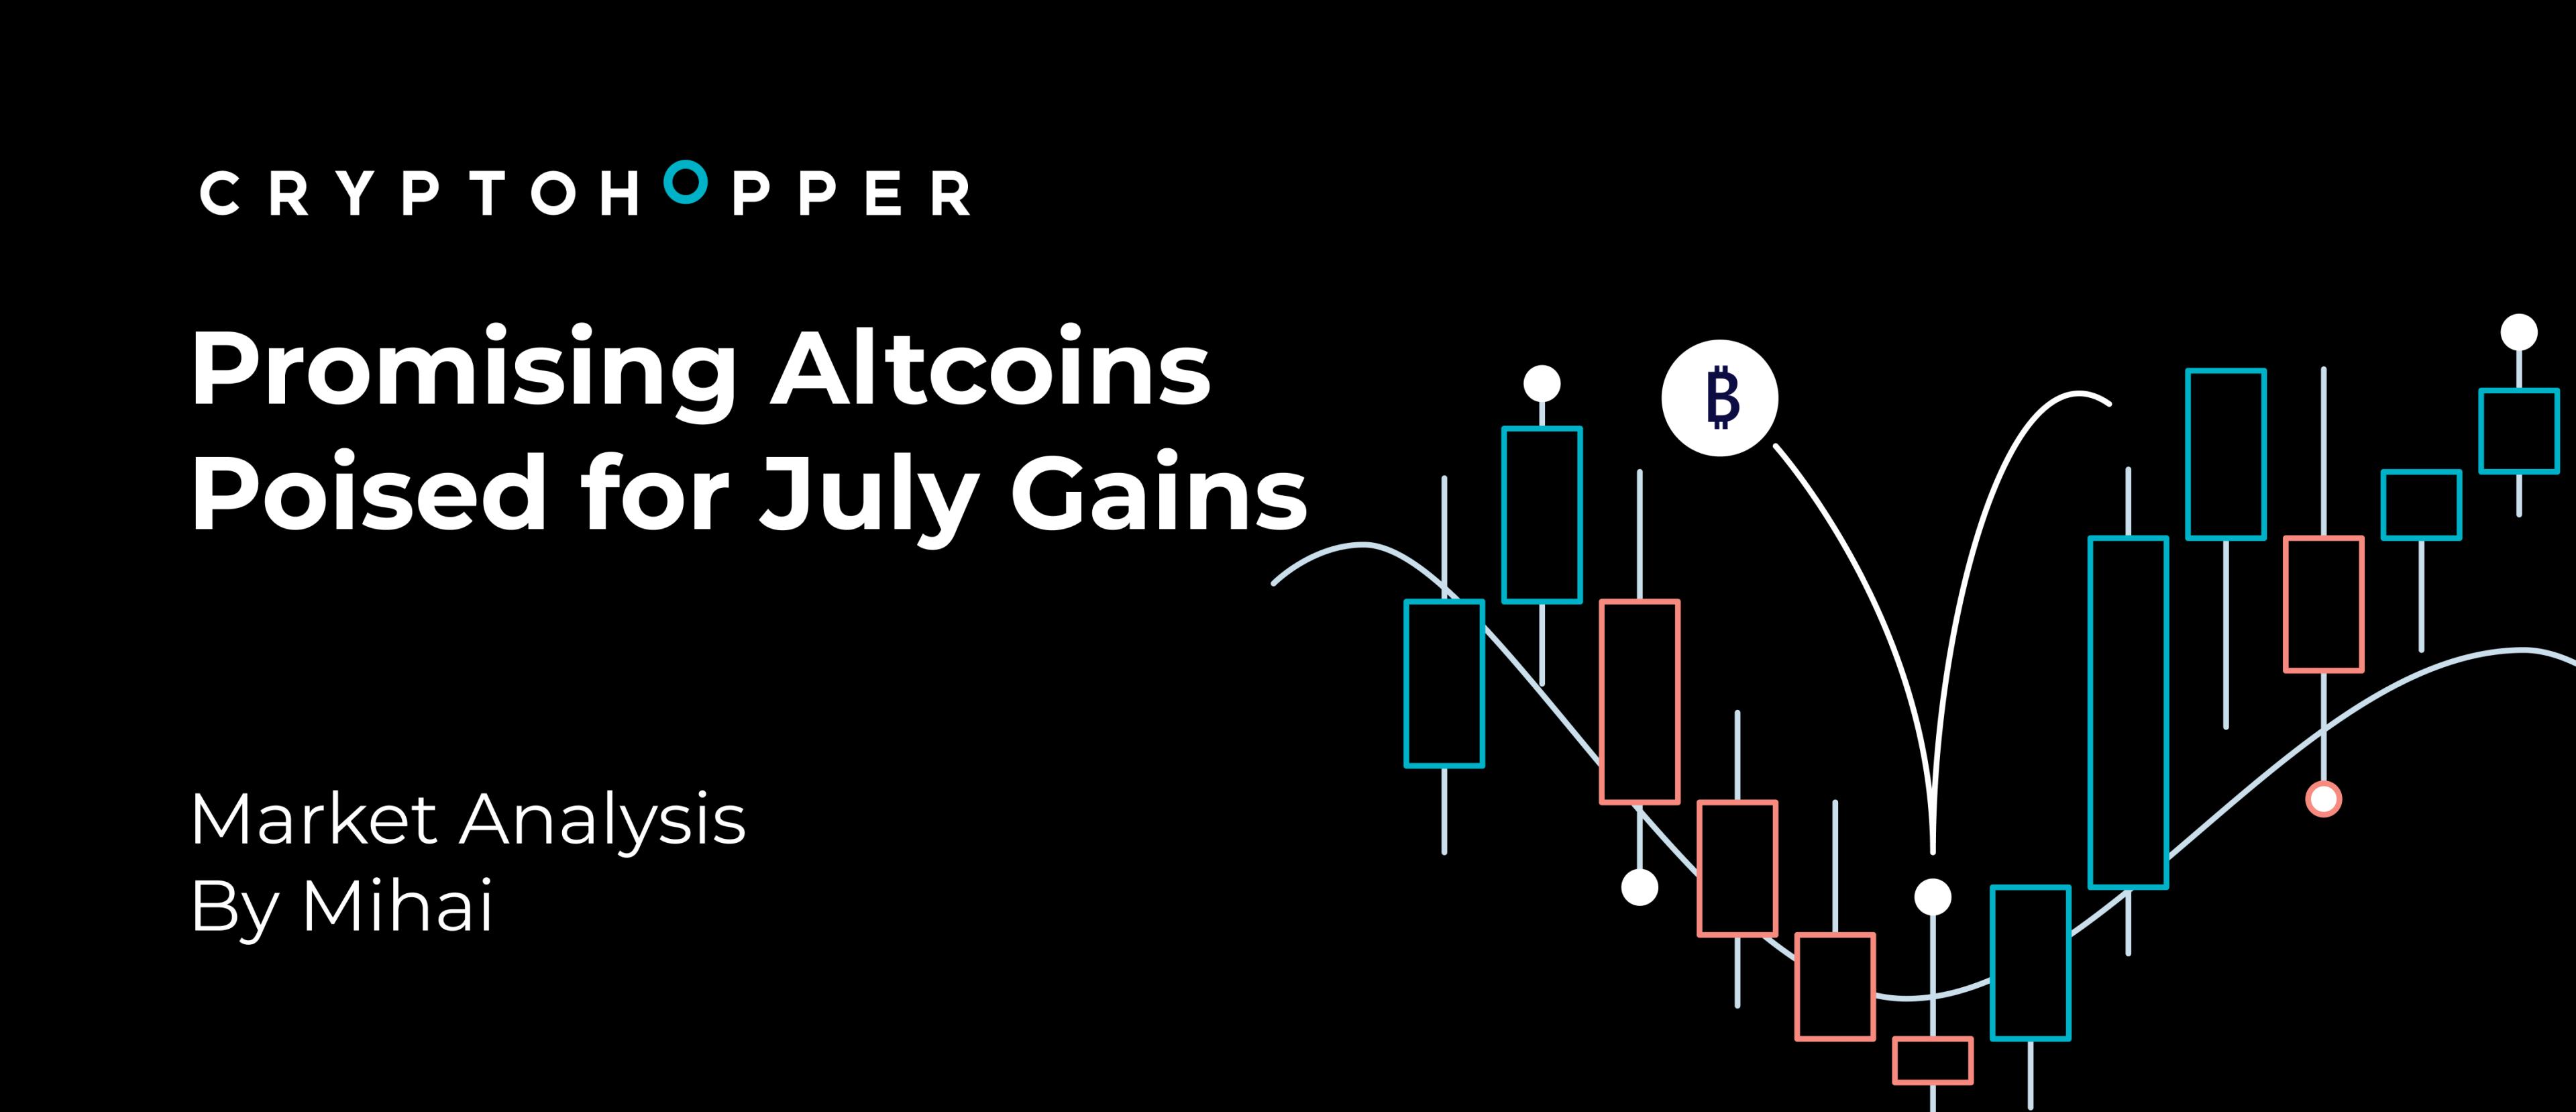 Promising Altcoins Poised for July Gains